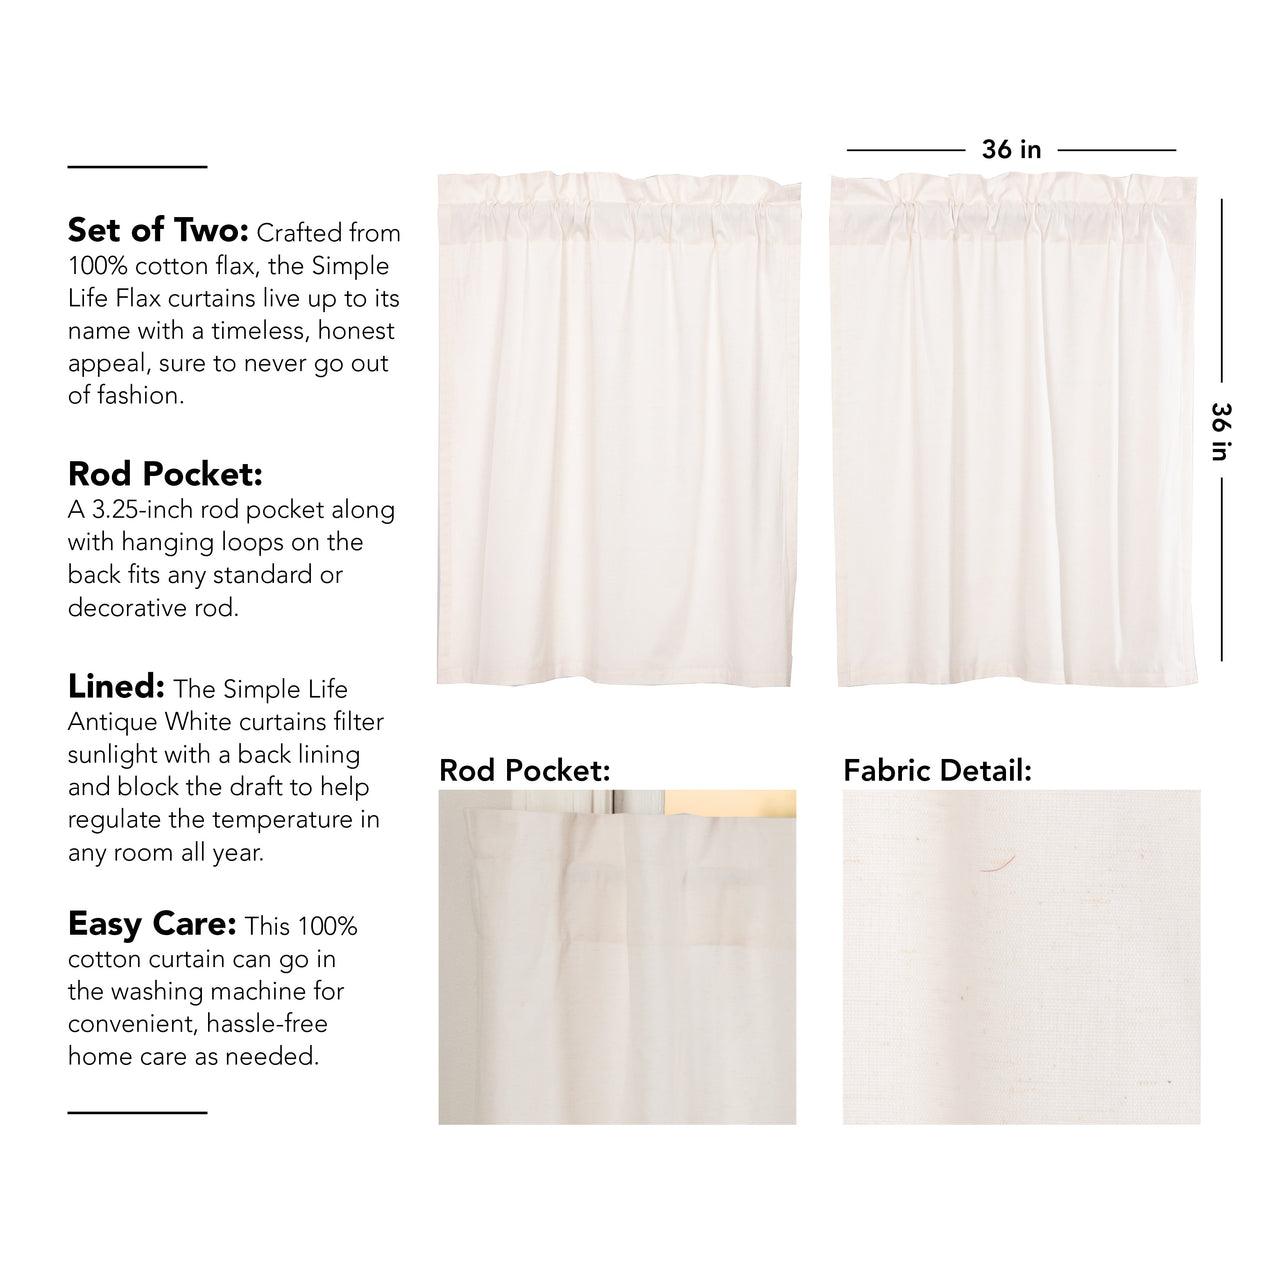 Simple Life Flax Antique White Tier Curtain Set of 2 L36xW36 VHC Brands